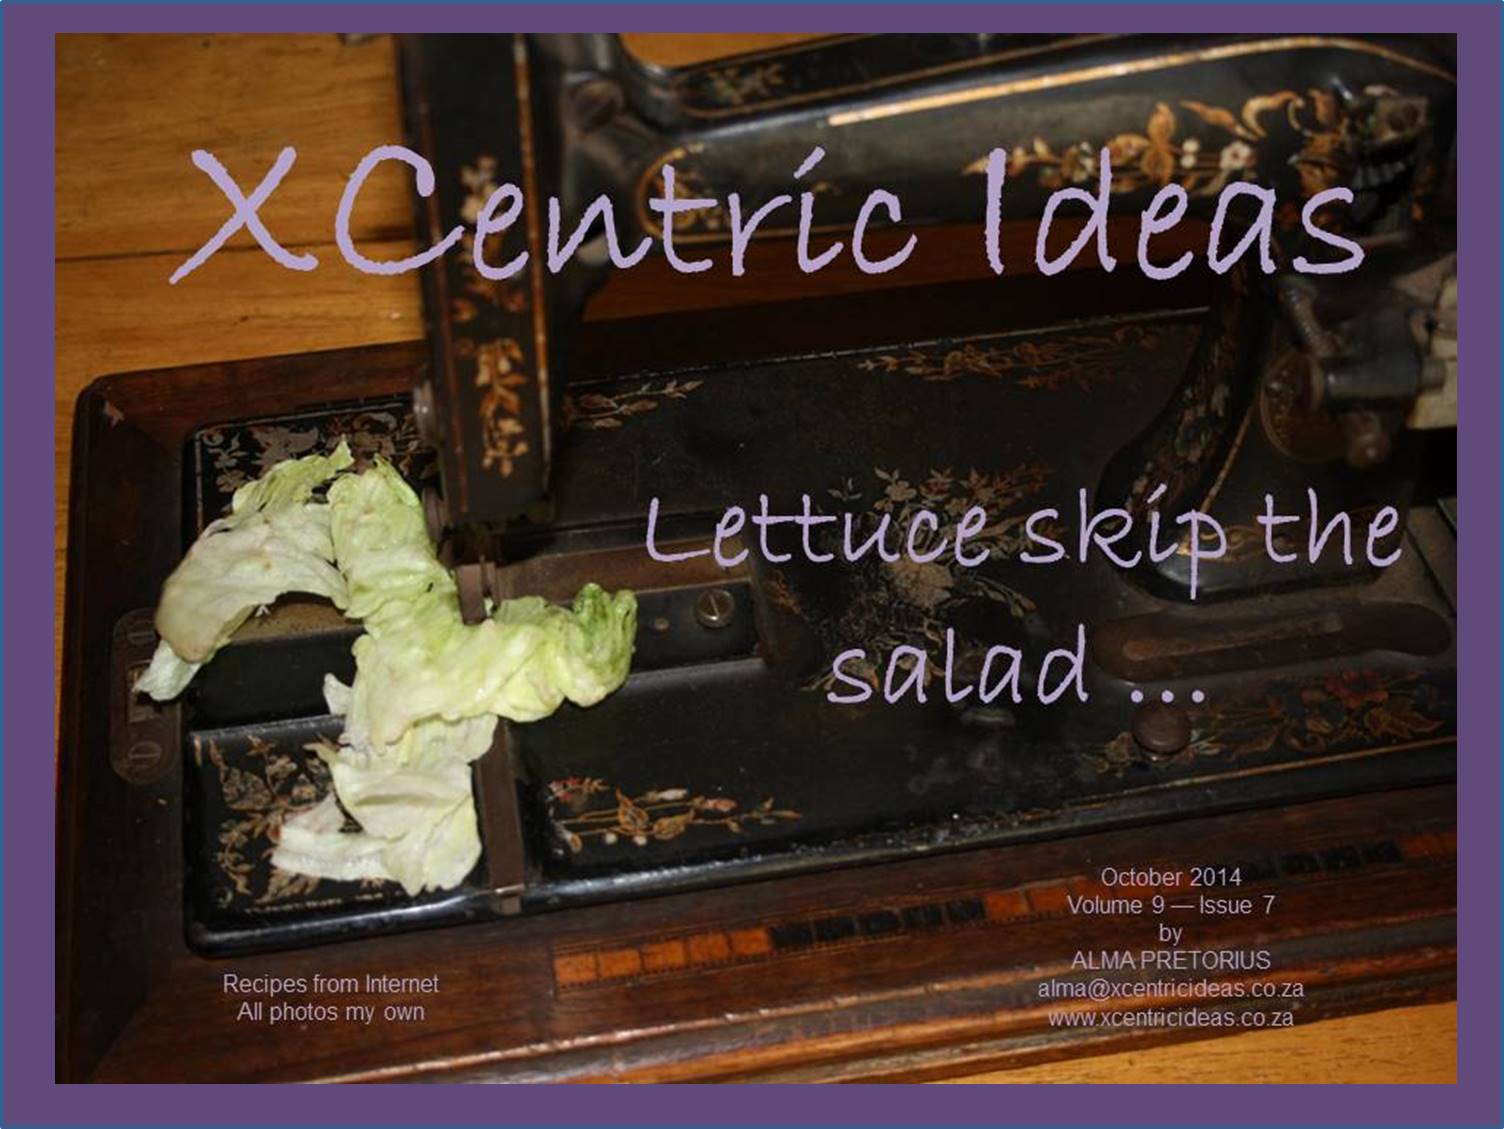 XCentric Ideas 2014 Issue 7